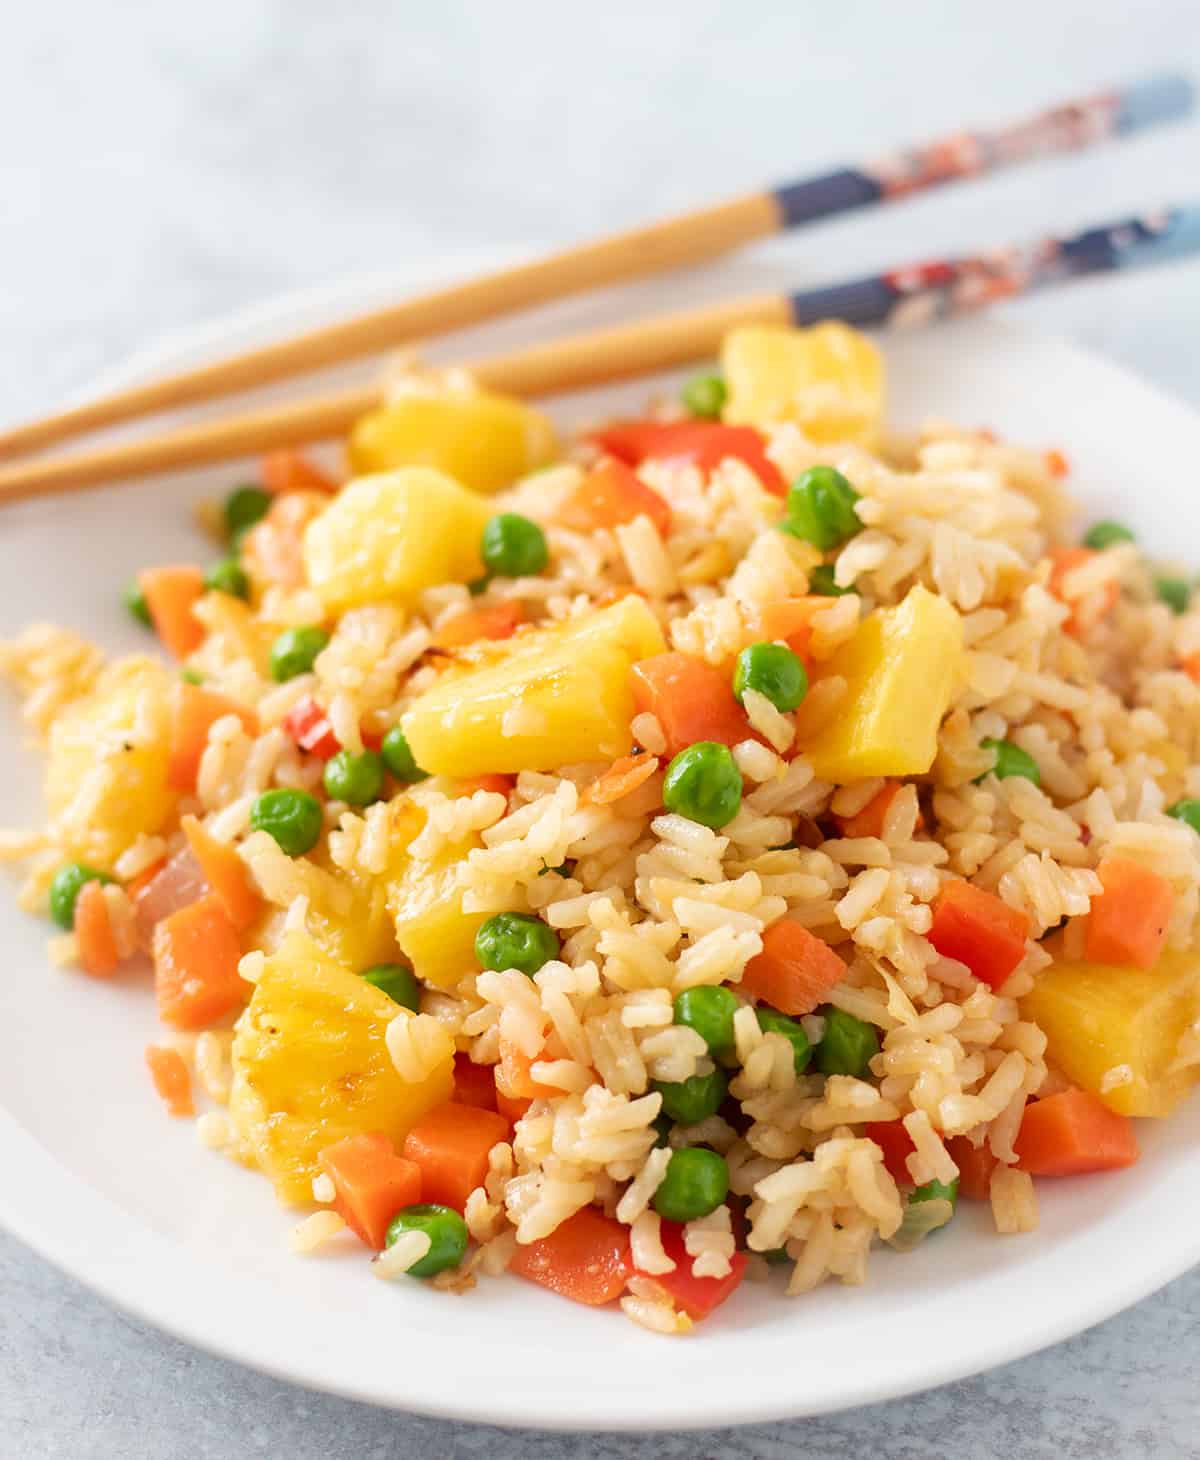 pineapple fried rice on a white plate with chopsticks for serving